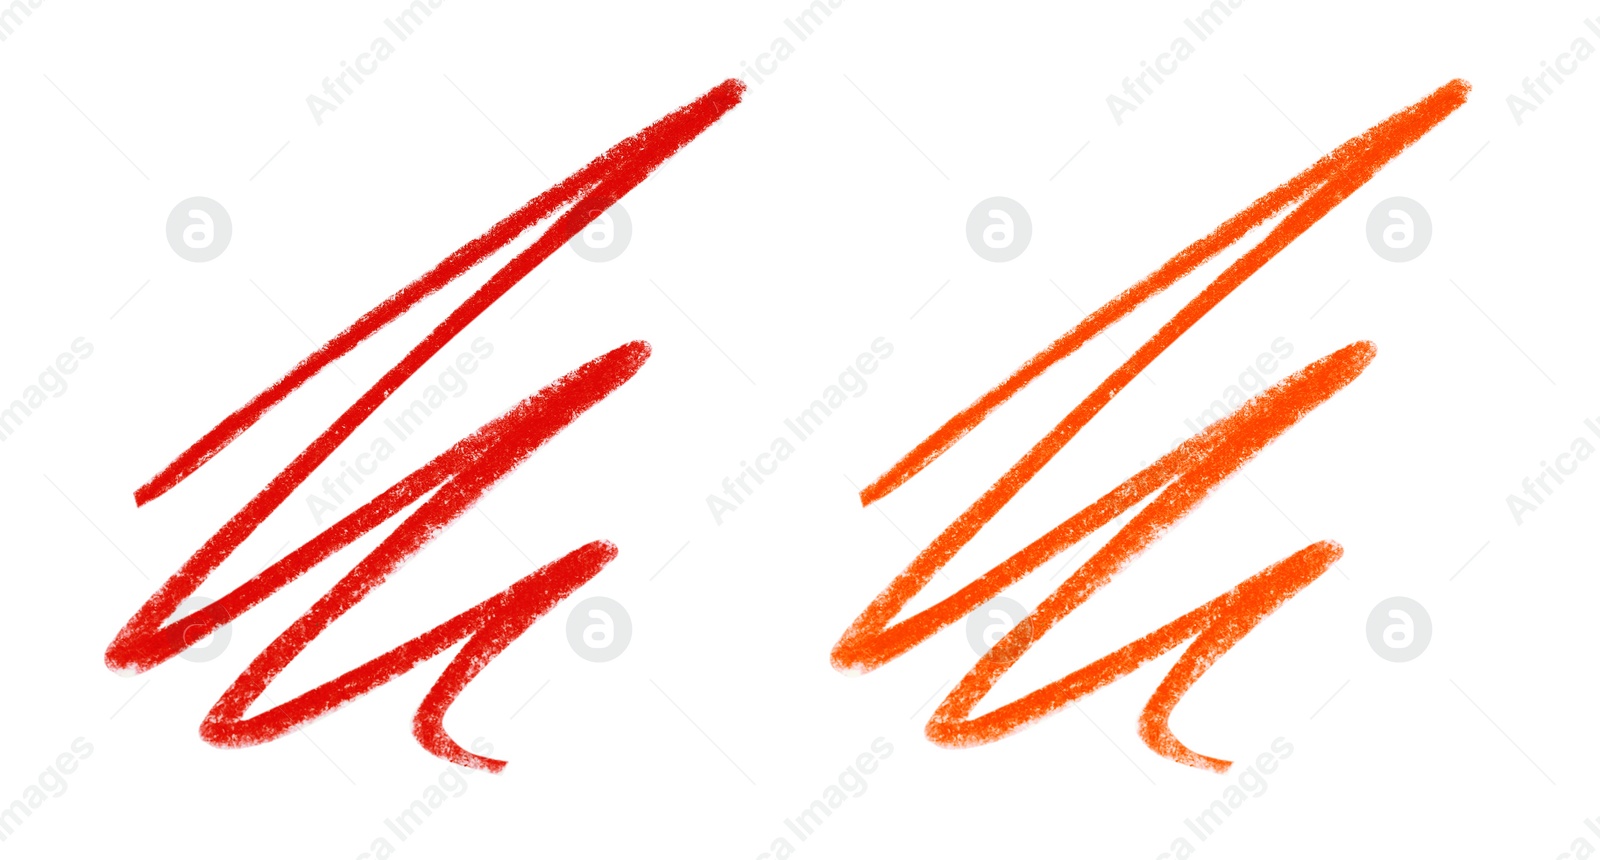 Image of Collage of color drawn pencil scribbles on white background